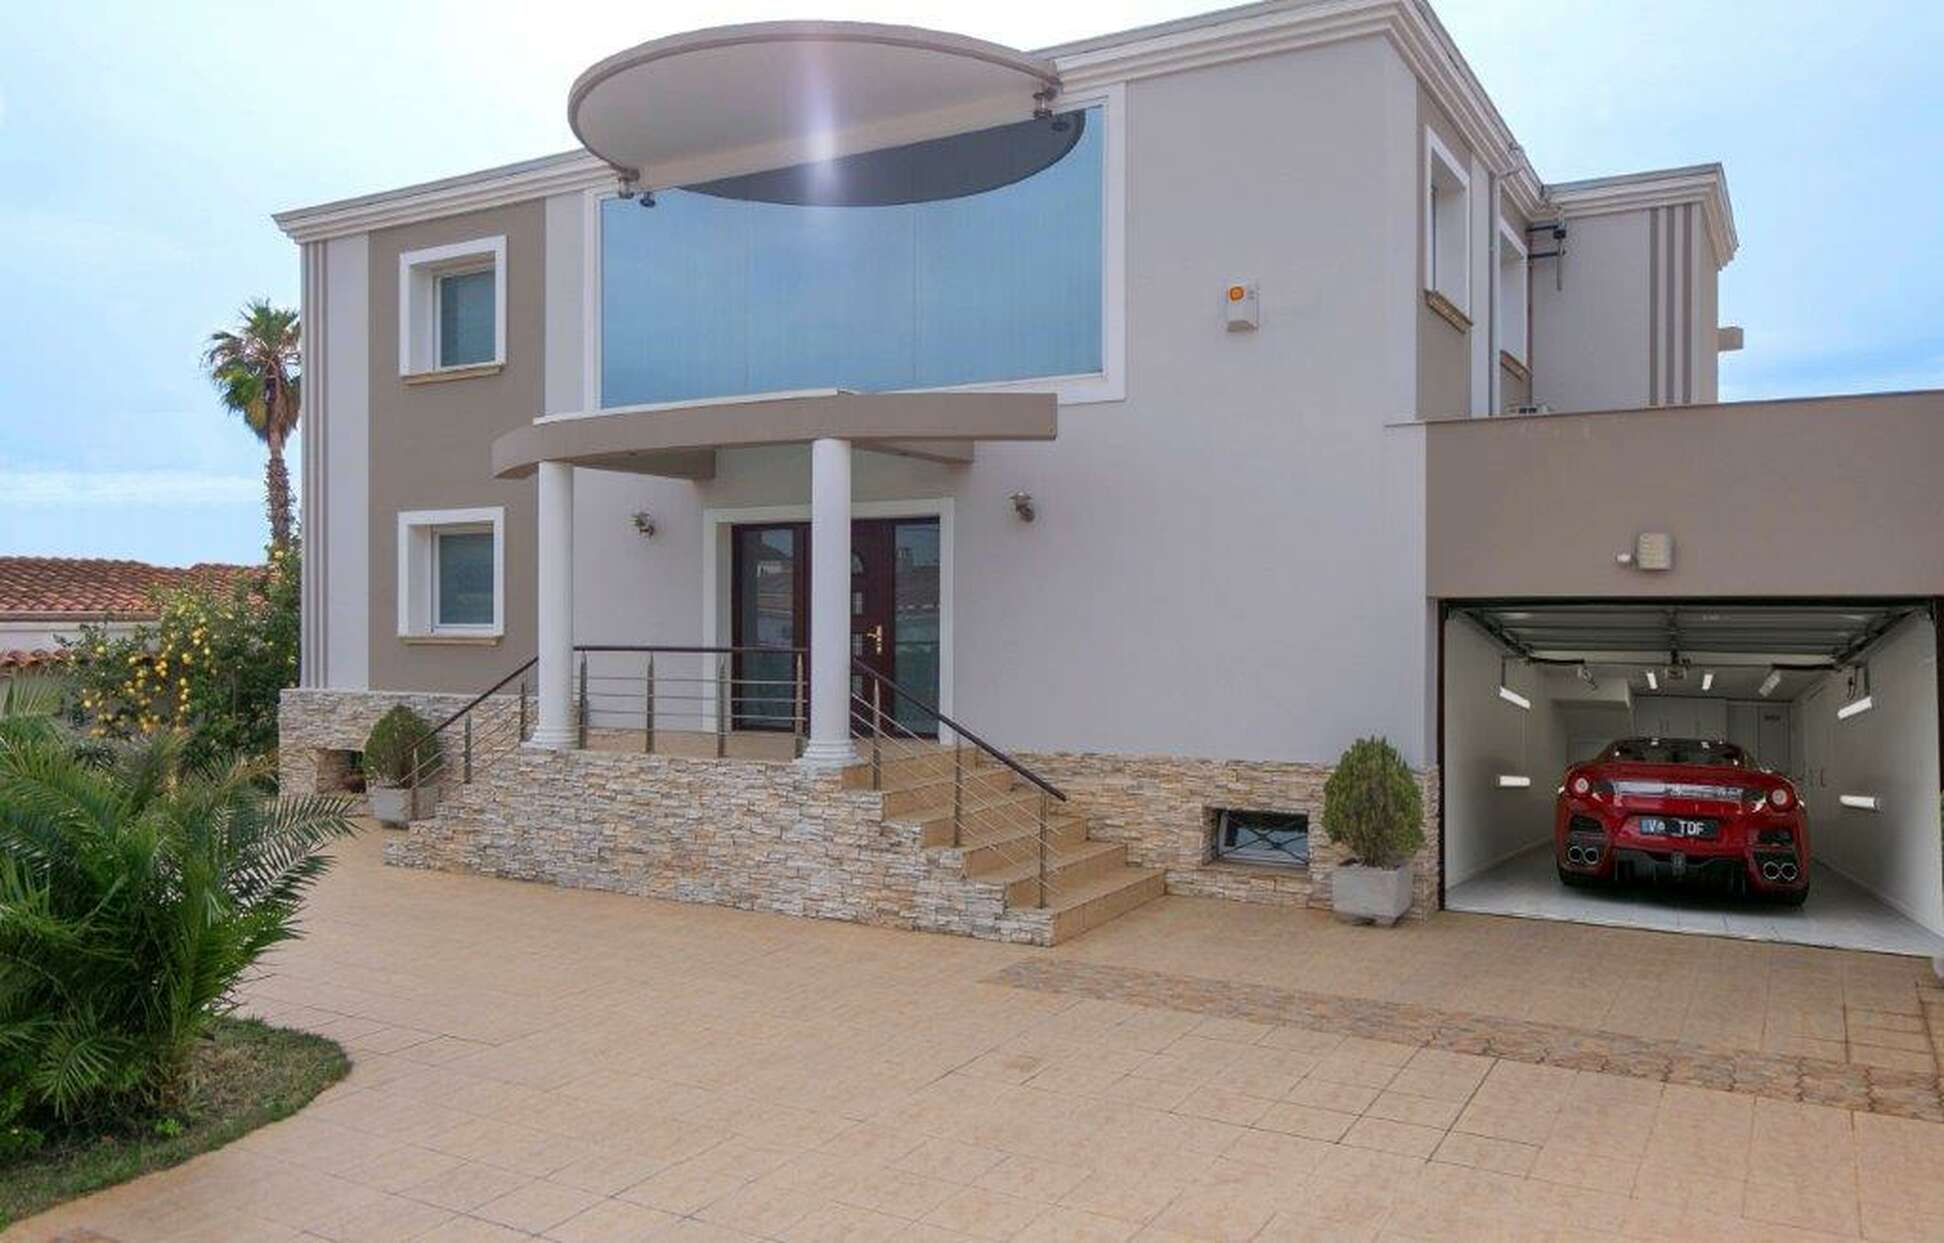 High standing villa for sale located in one of the main canals of Empuriabrava.